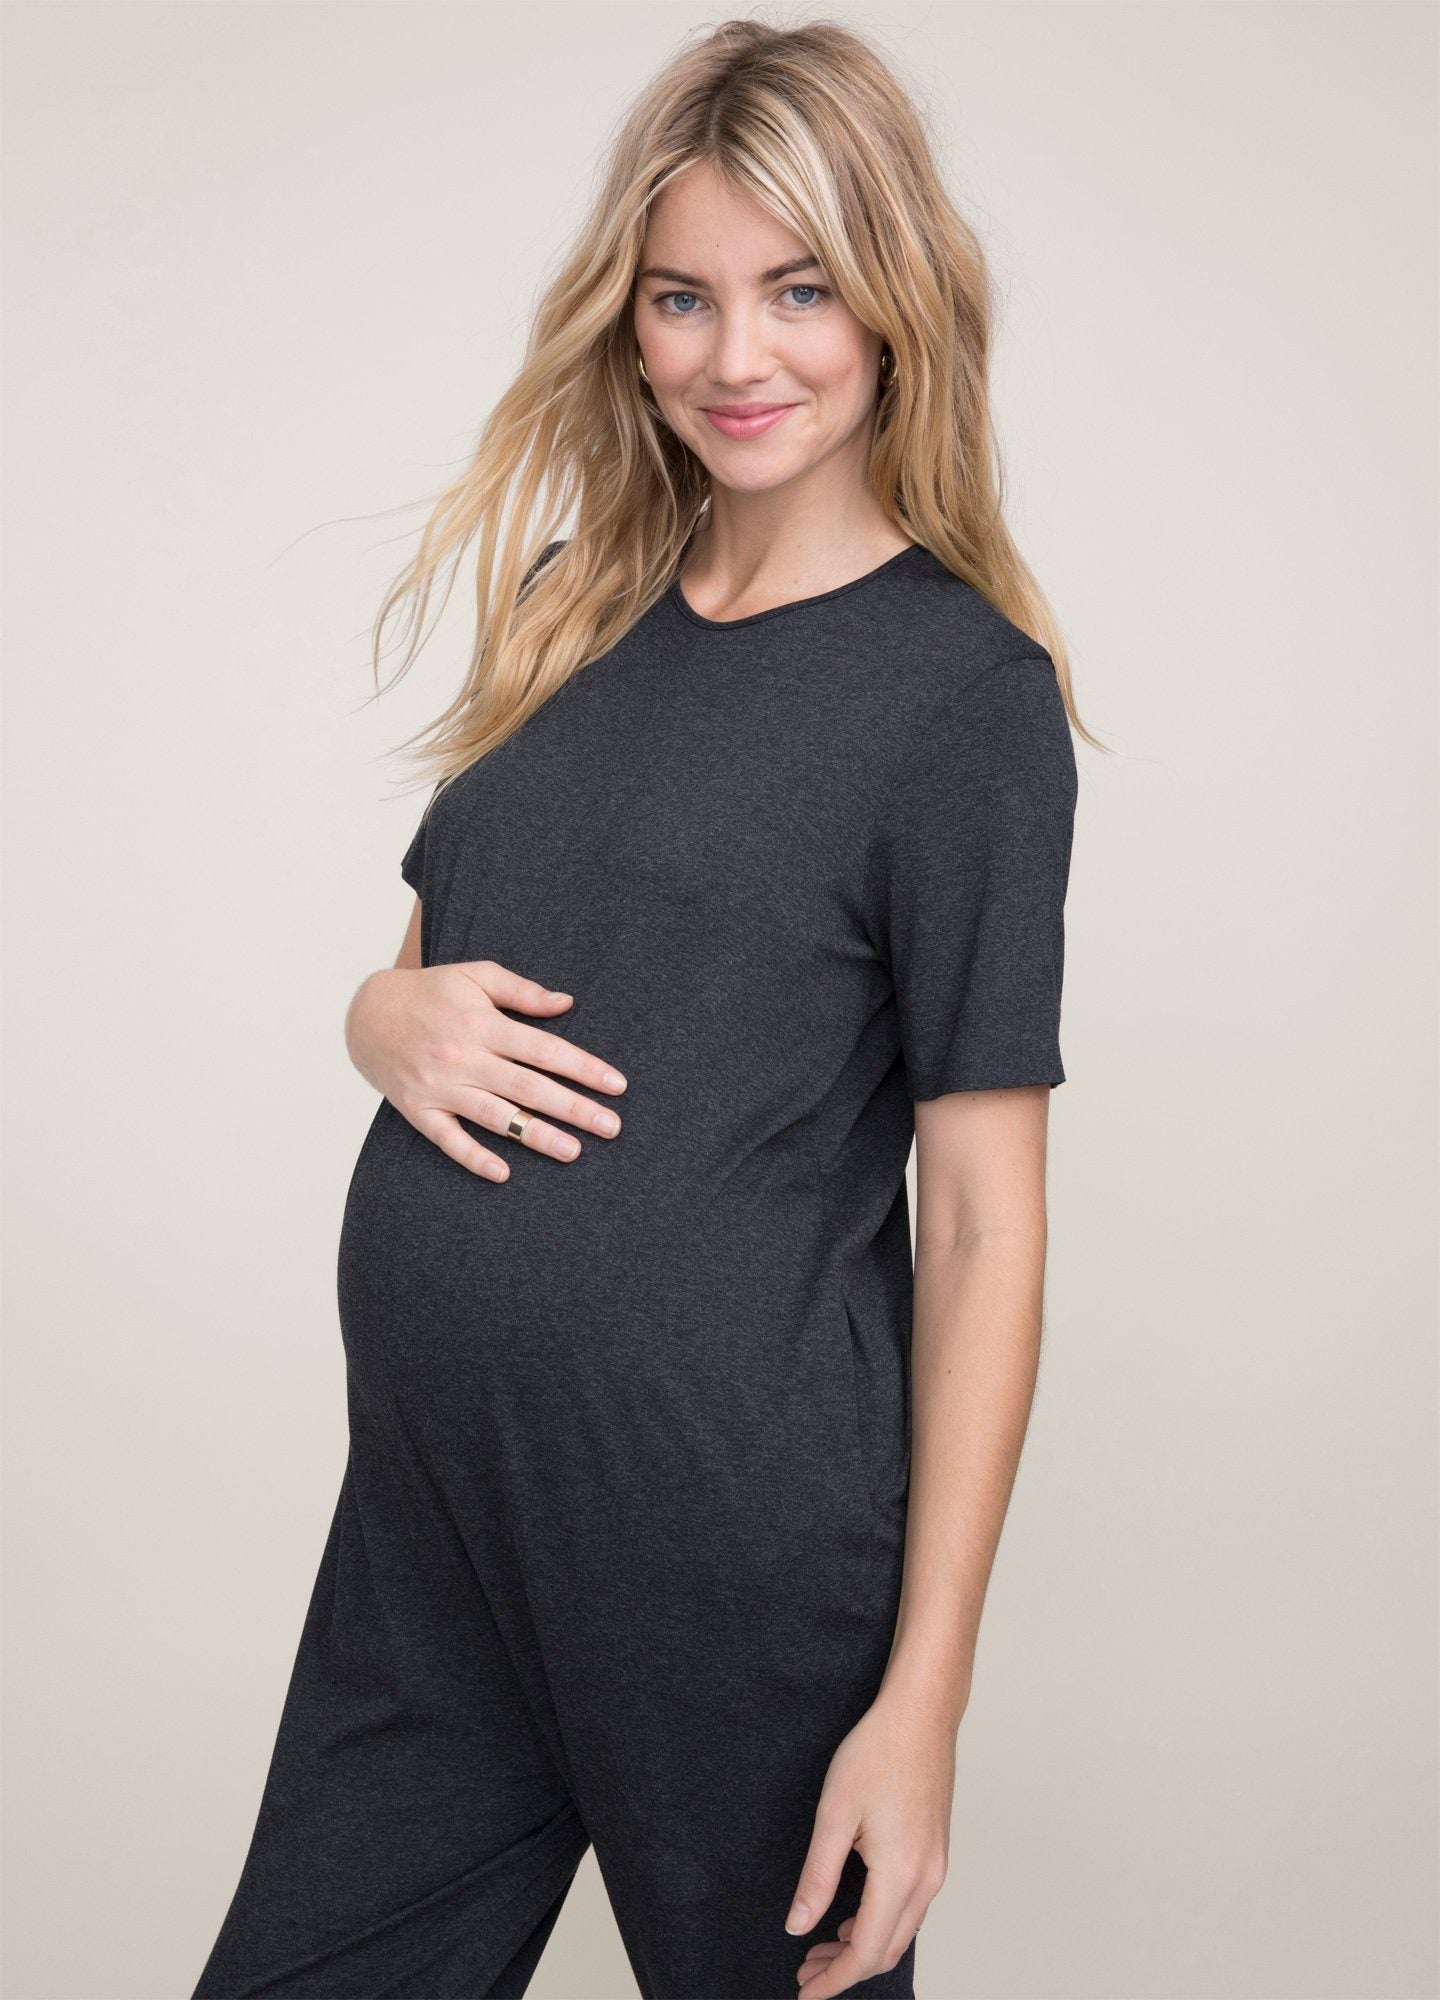 Walkabout Jumper - Chic Fall Maternity | HATCH Collection